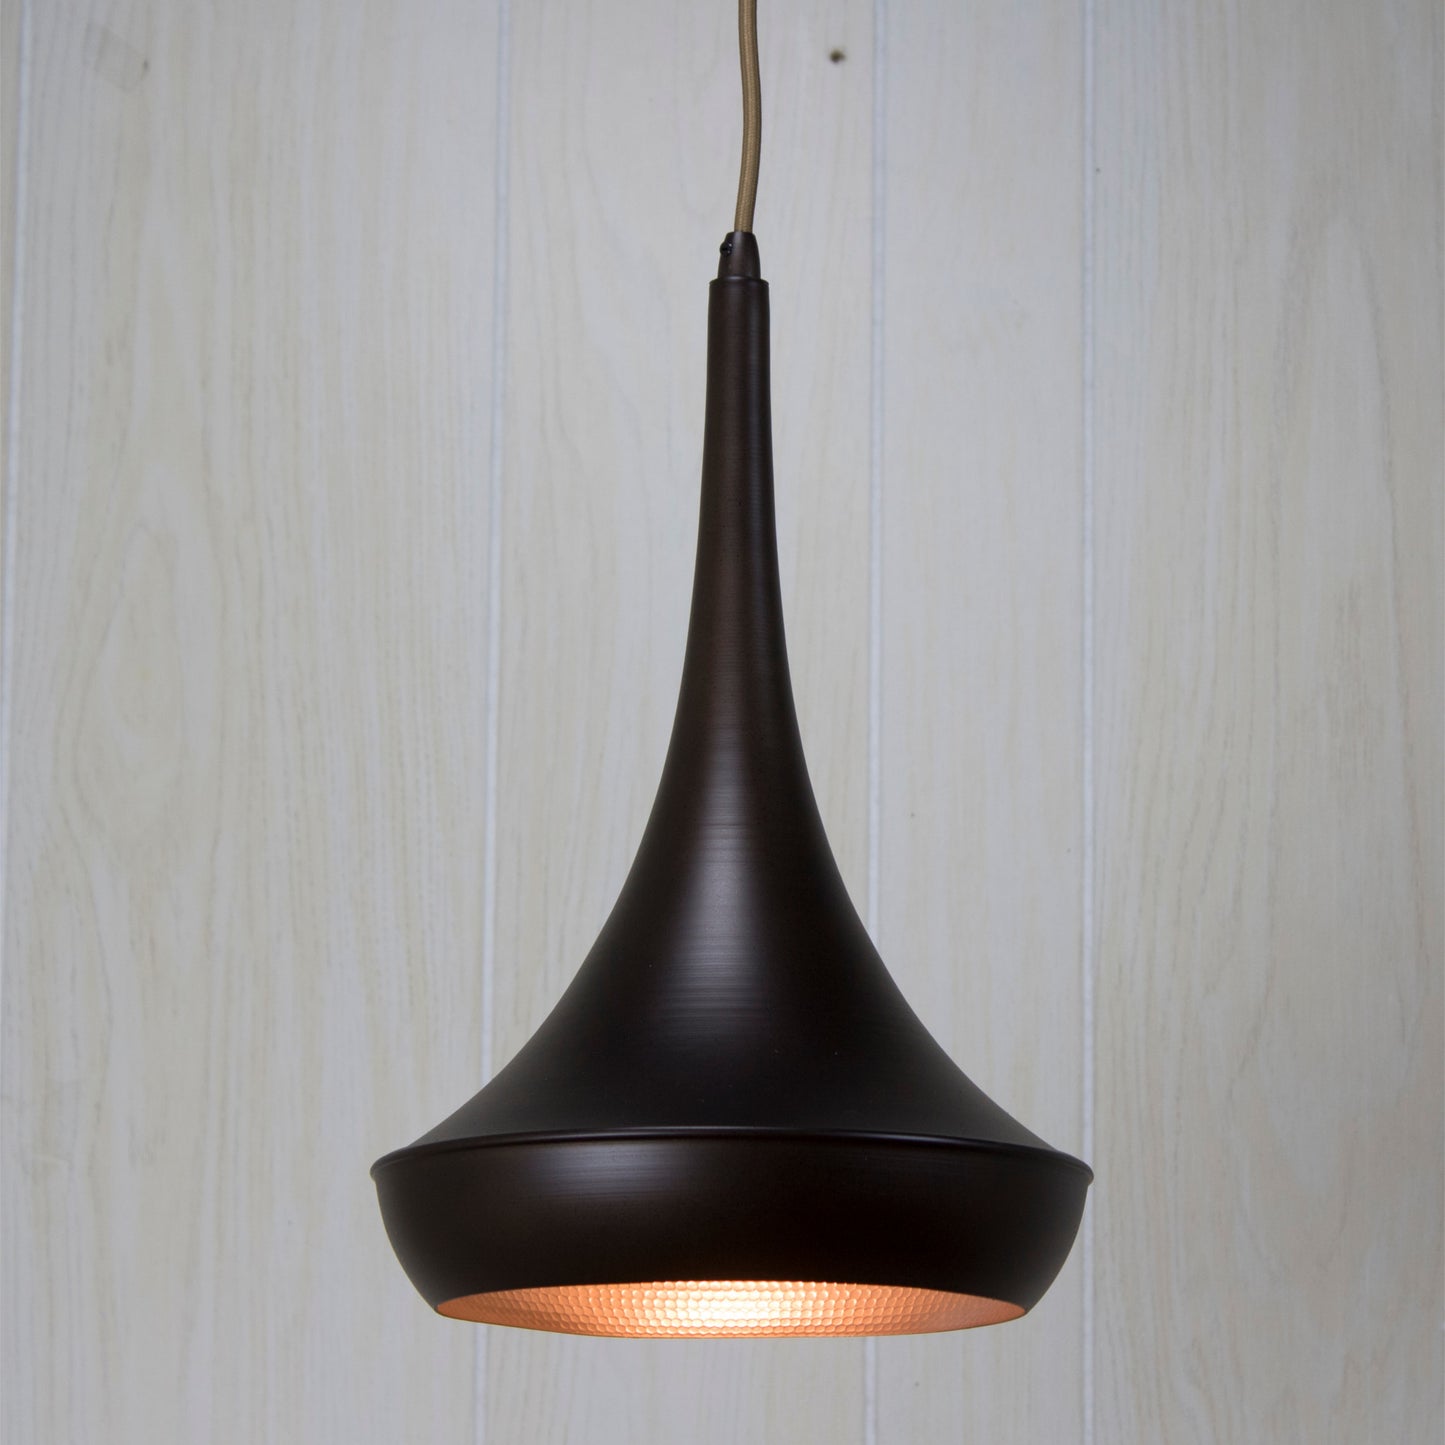 1-Light Pendant Oiled Bronze by Quorum. Modern Design Perfect for updating a kitchen island, over a bar, or adding a fresh look to a bathroom